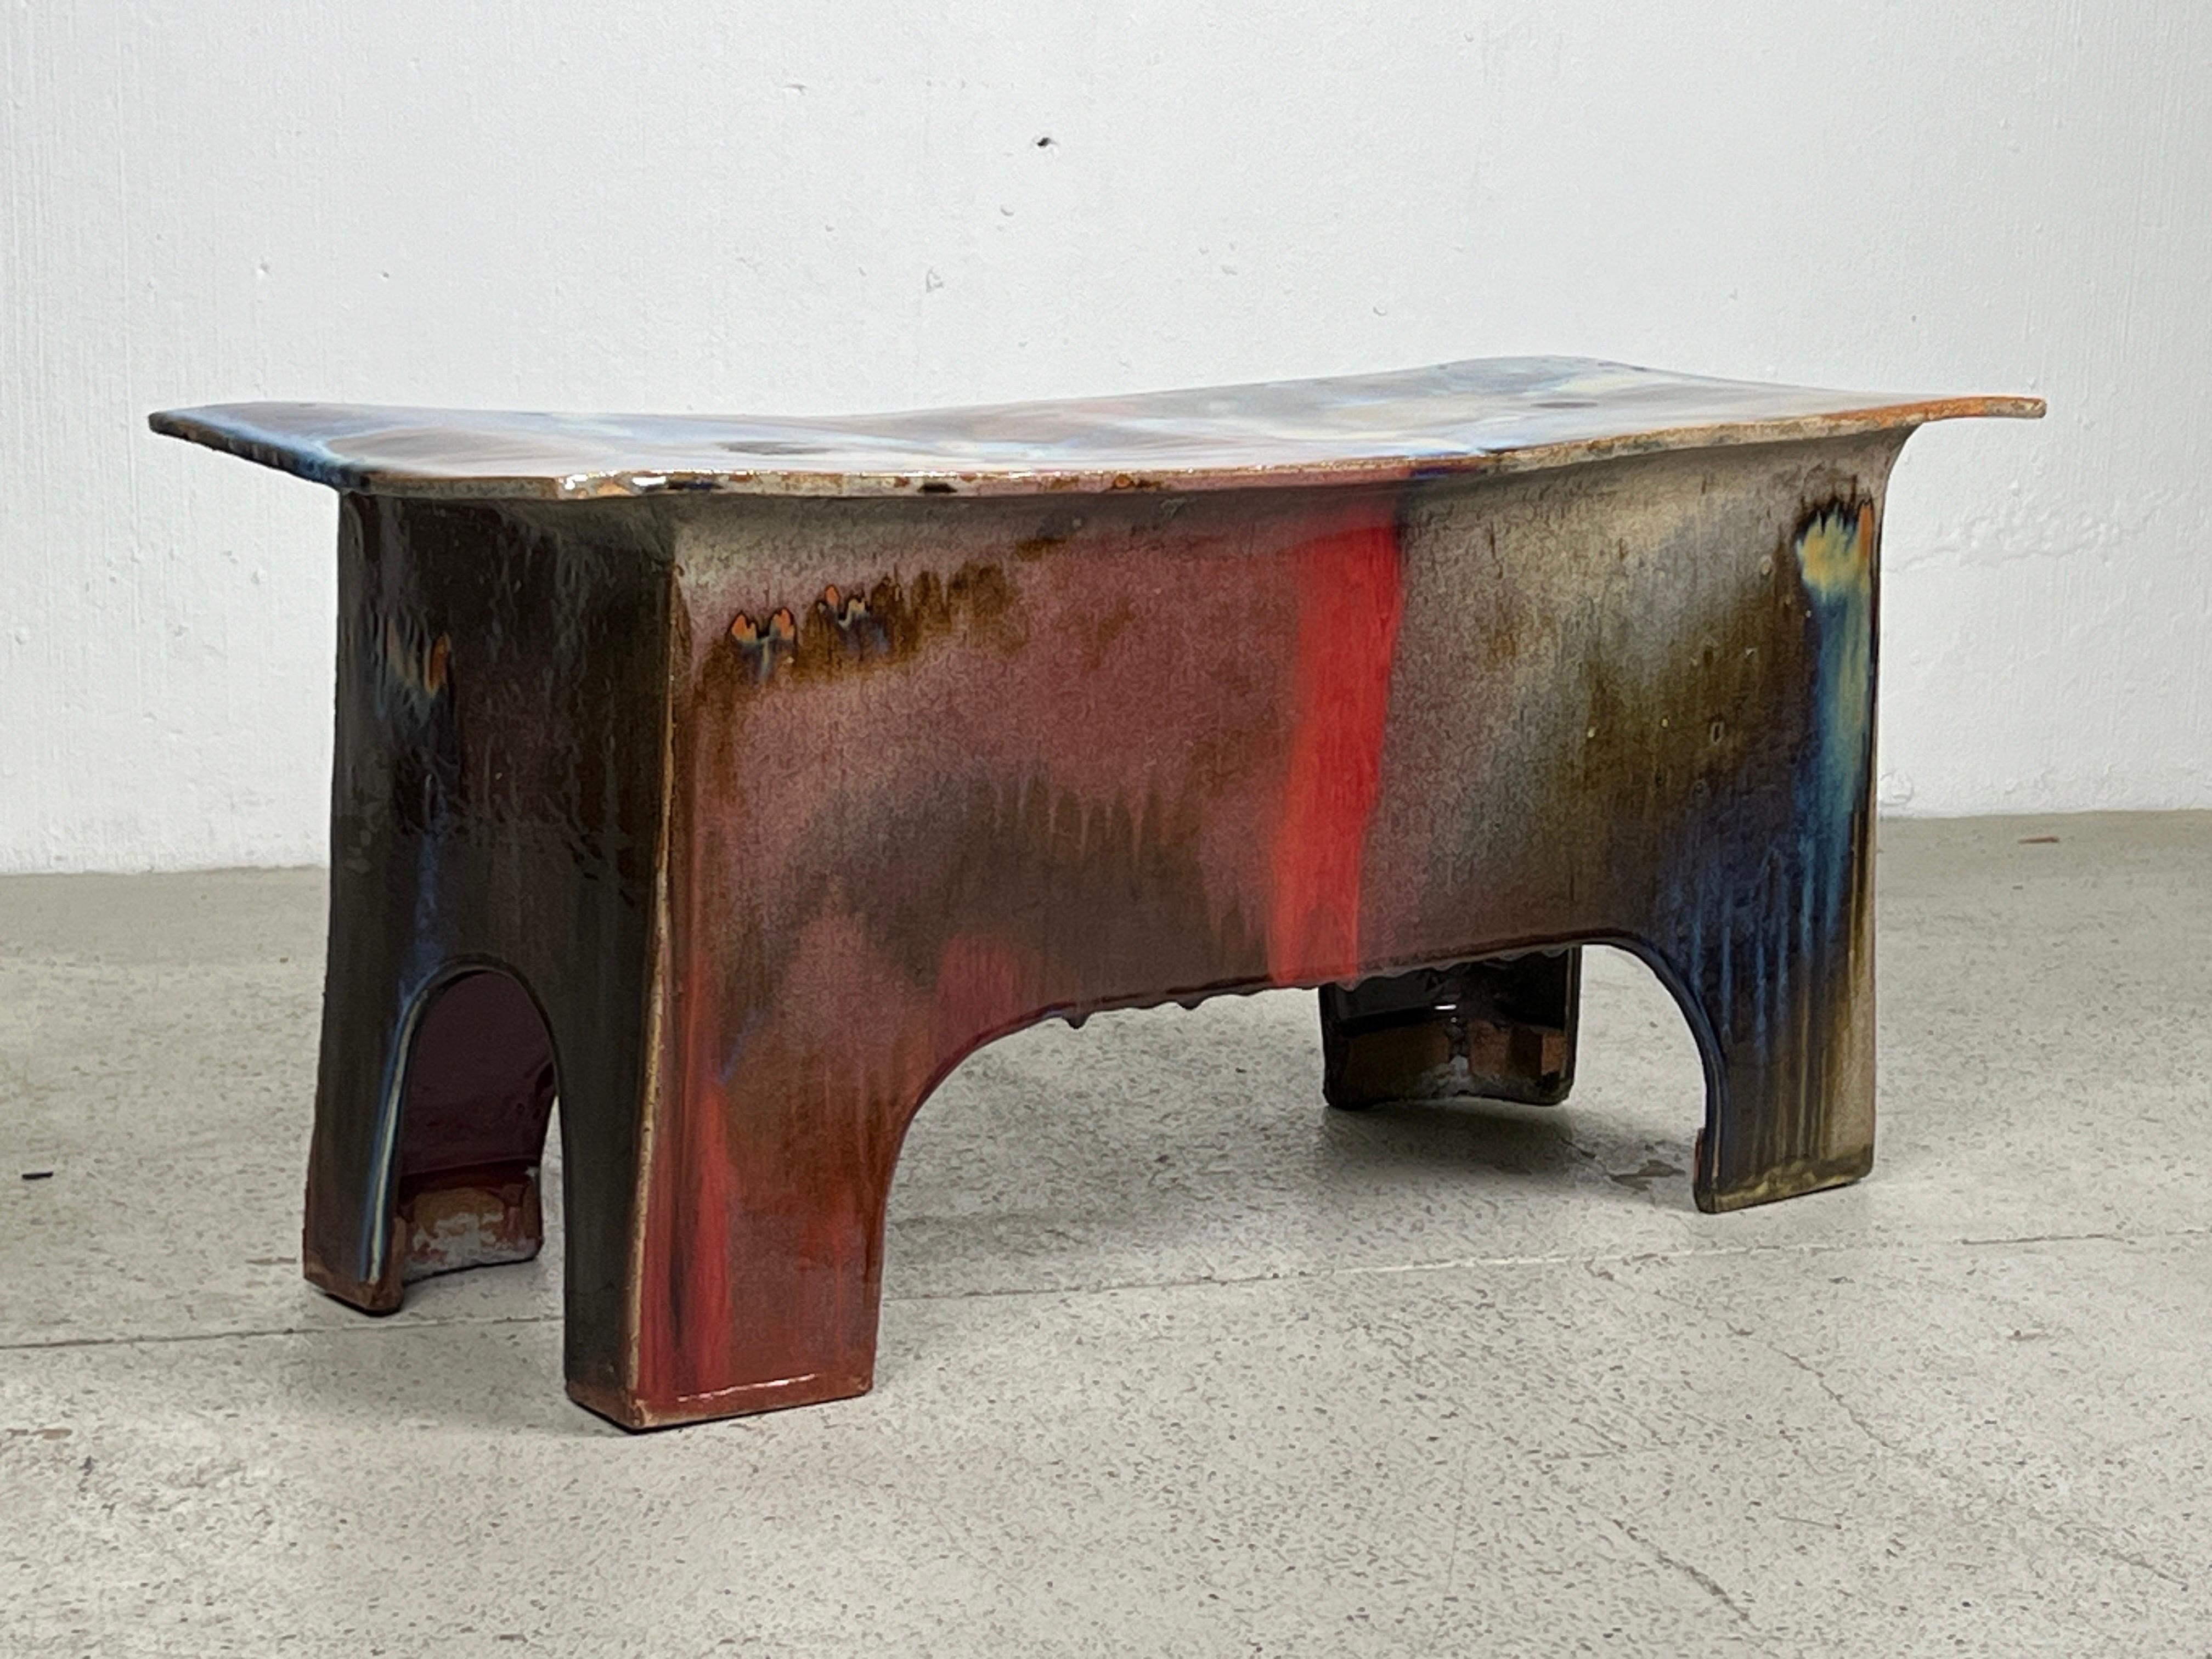 Eric O'Leary Slab rolled and hand constructed with Asiatic aesthetic and form finished in a vibrant glaze. A similar bench can be found in the permanent collection of the Museum of Fine Arts, Boston.